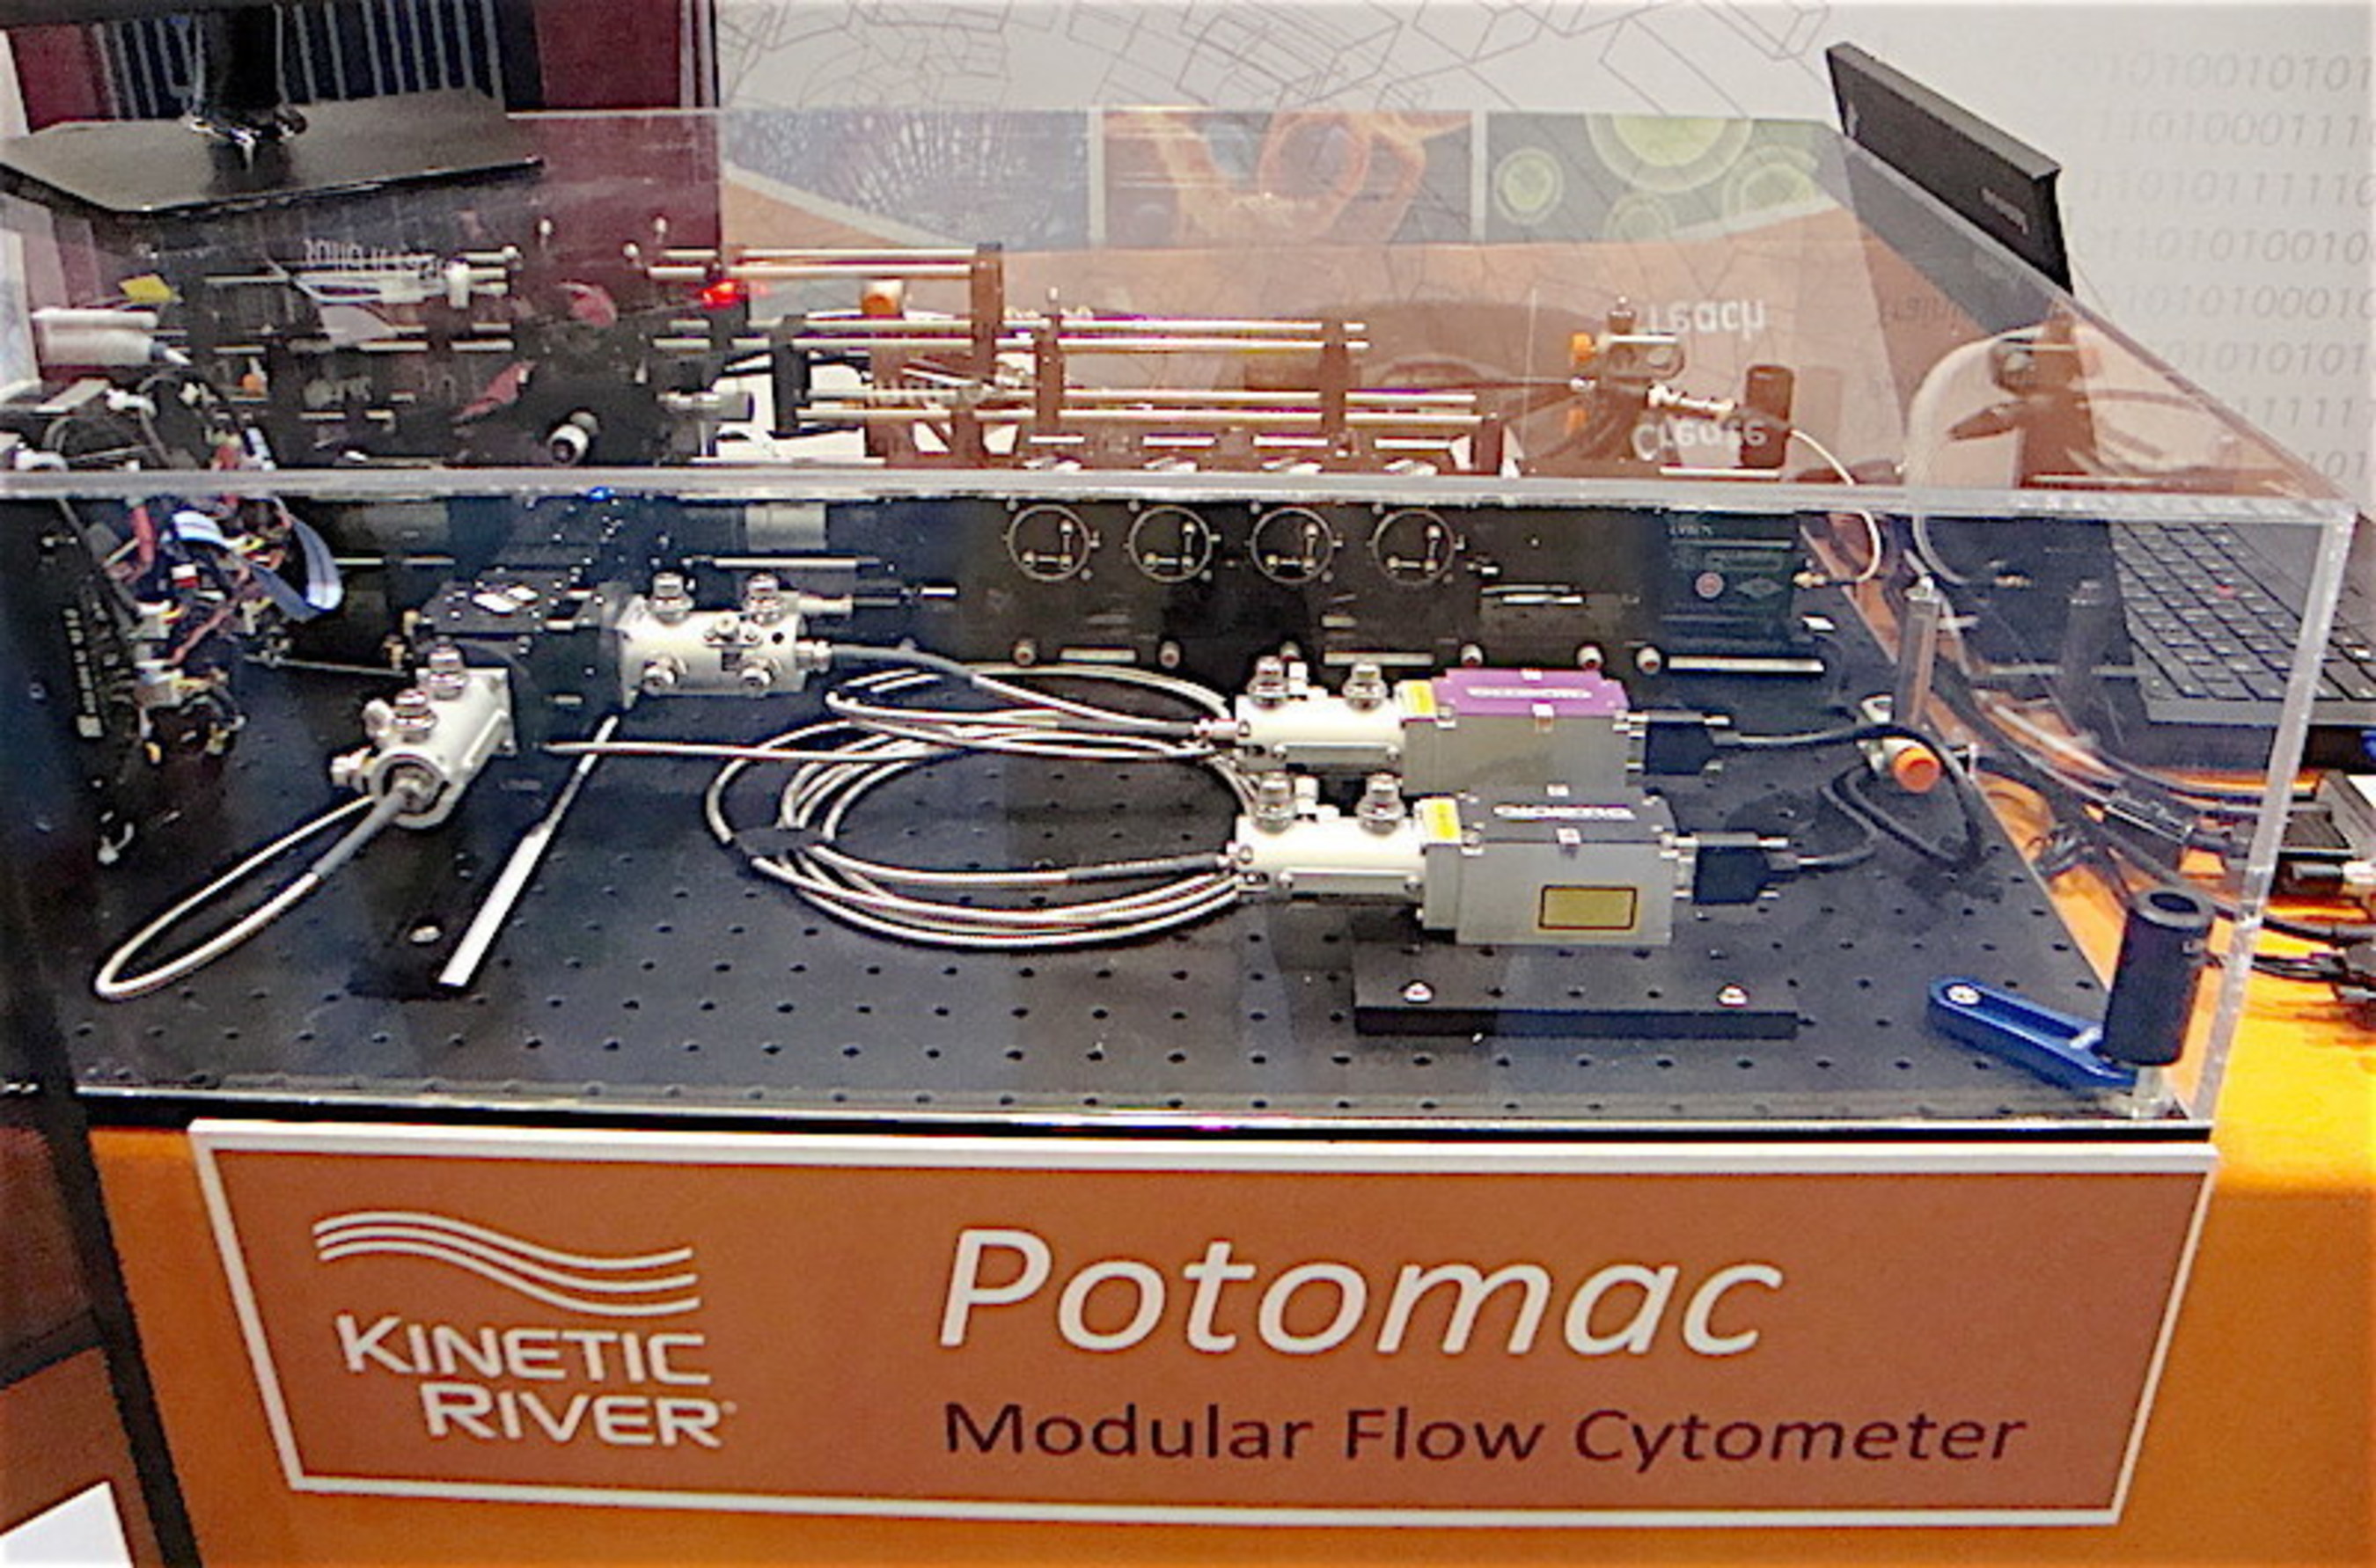 The Potomac modular flow cytometer is a flexible platform designed for ease of modification and upgrades. Customizable from 1 to 7 lasers and from 4 to 20 detection channels, it can accommodate novel light sources and detectors.